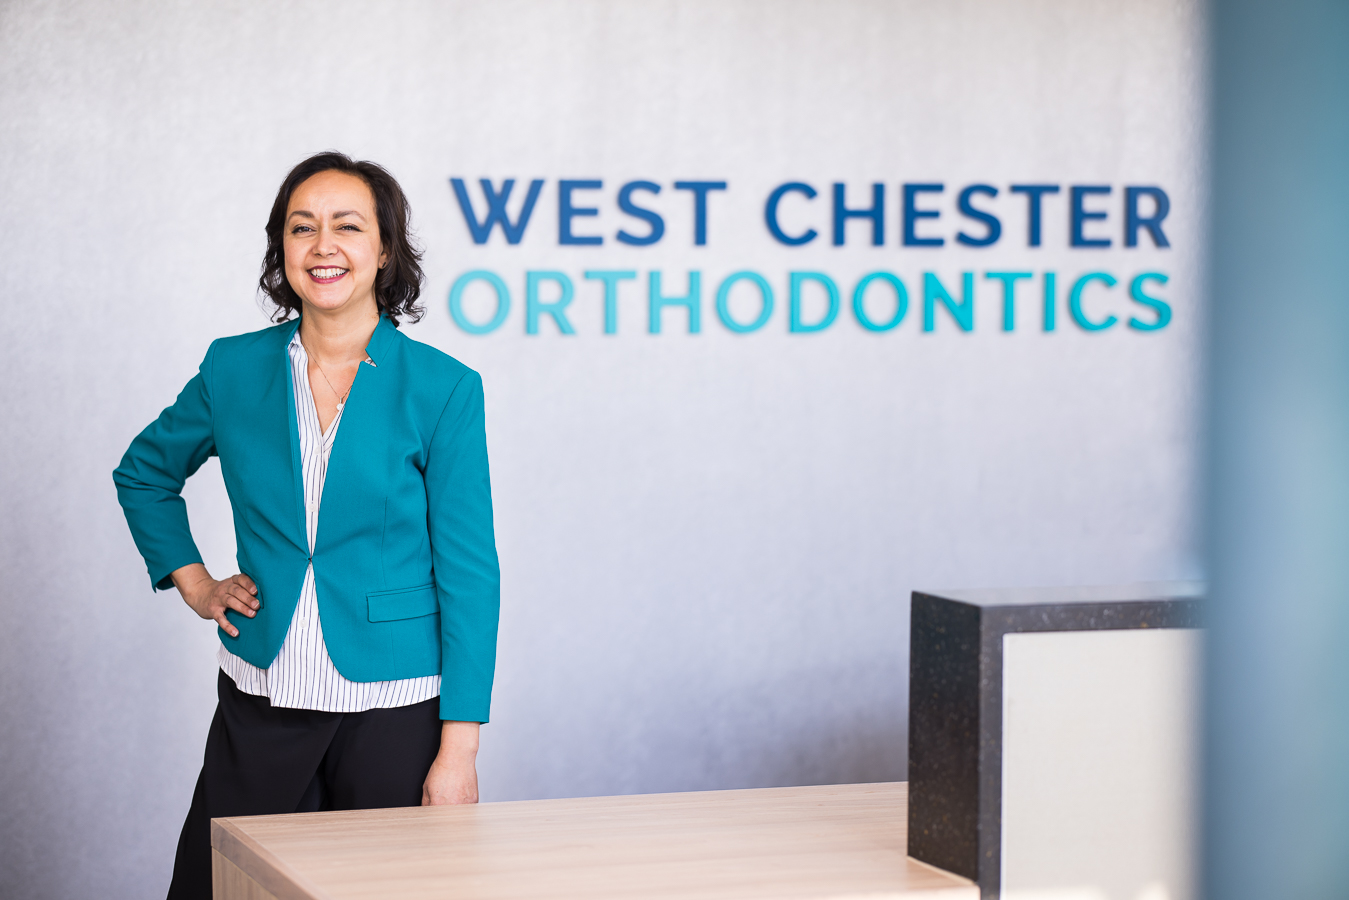 business branding photographer, lisa rhinehart, captures this personalized brand image of dr ferrell owner of west chester orthodontics as she stands by her receptionist desk smiling with pops of teal around her 